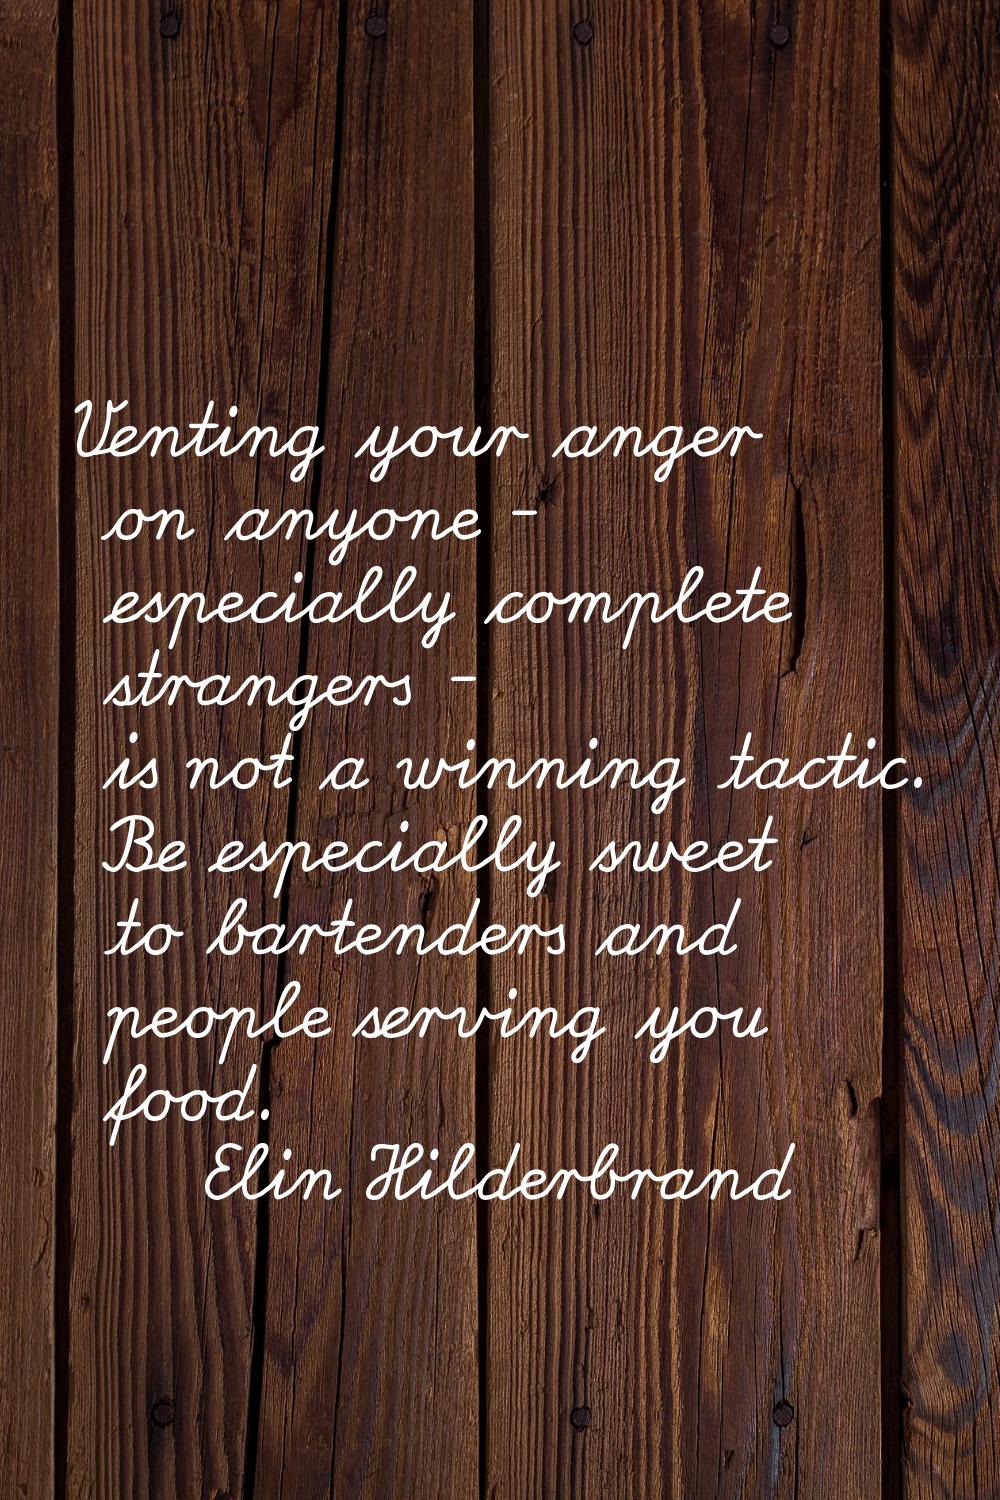 Venting your anger on anyone - especially complete strangers - is not a winning tactic. Be especial